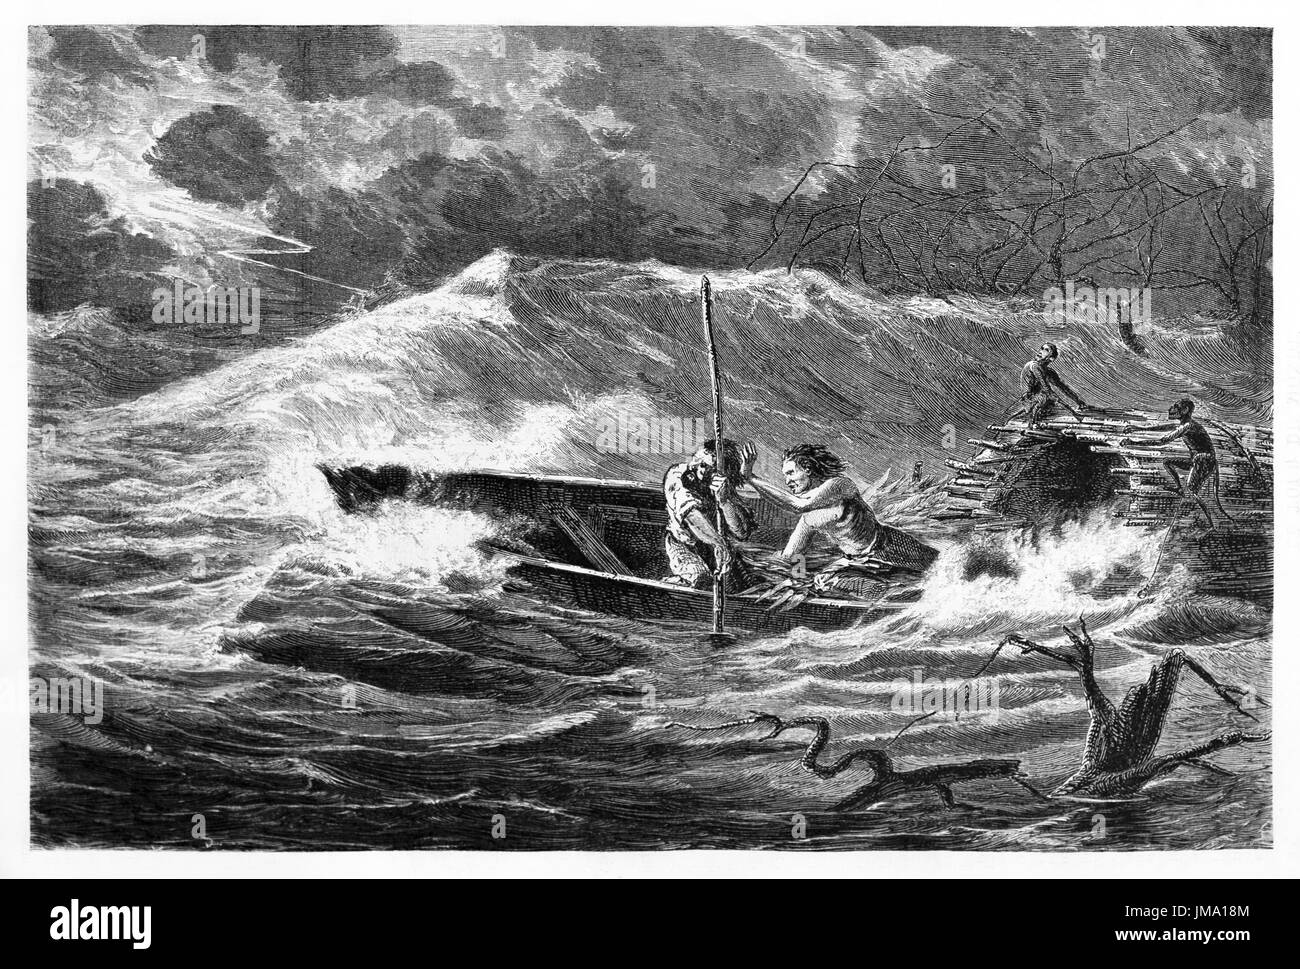 Old illustration of a boat on Amazon river during a storm. Created by Riou, Biard and Therington, published on Le Tour du Monde, Paris, 1861. Stock Photo